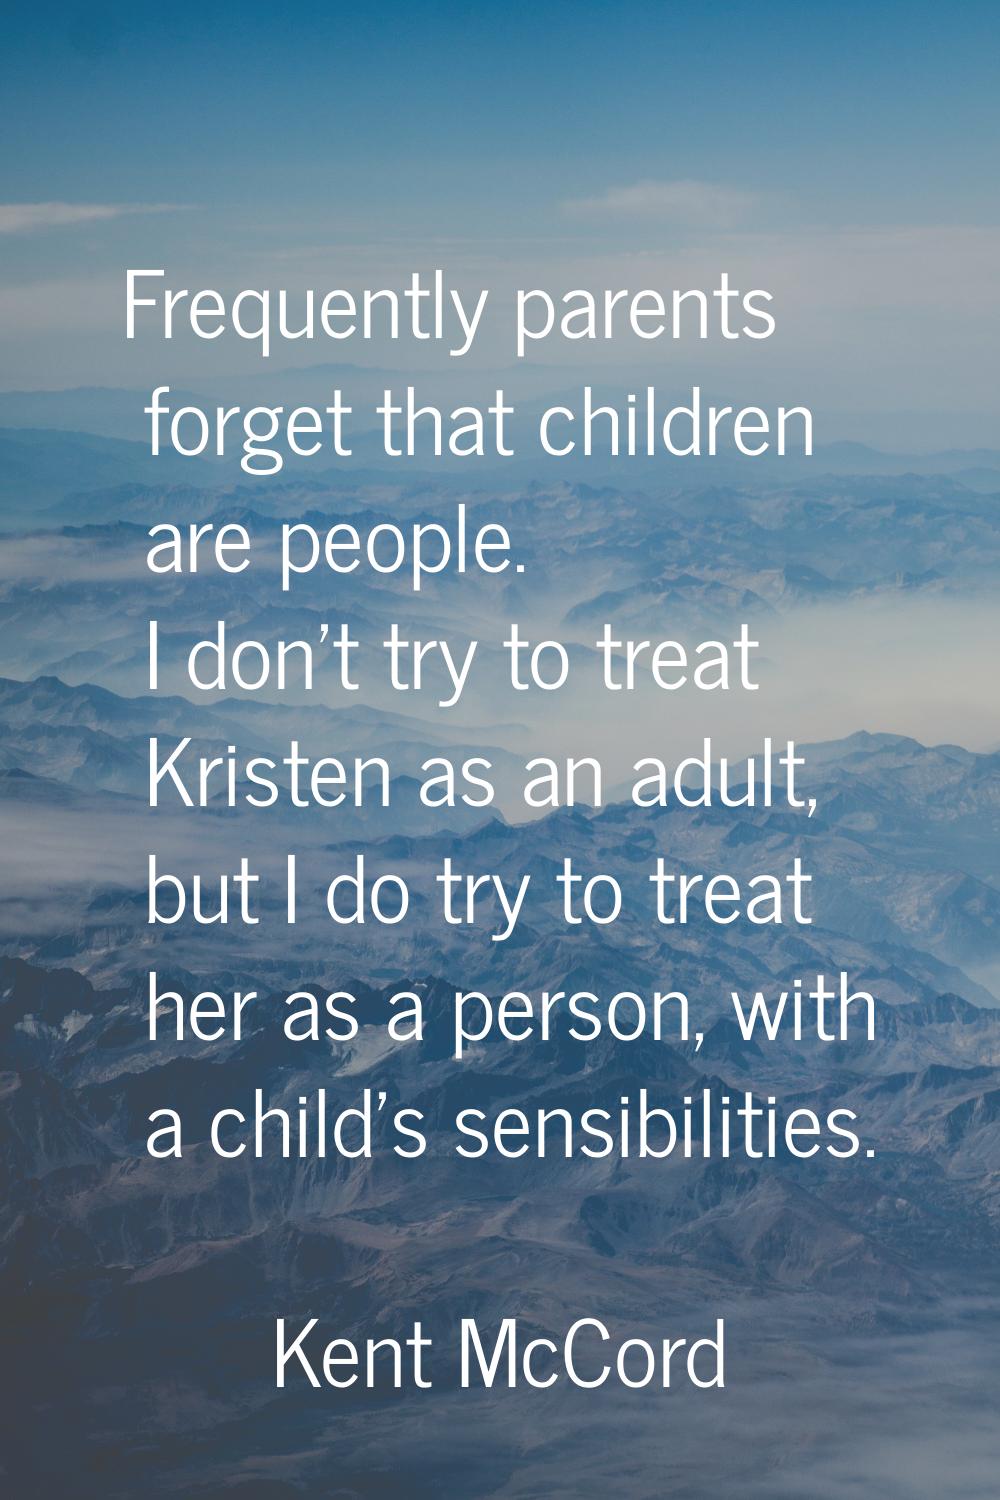 Frequently parents forget that children are people. I don't try to treat Kristen as an adult, but I